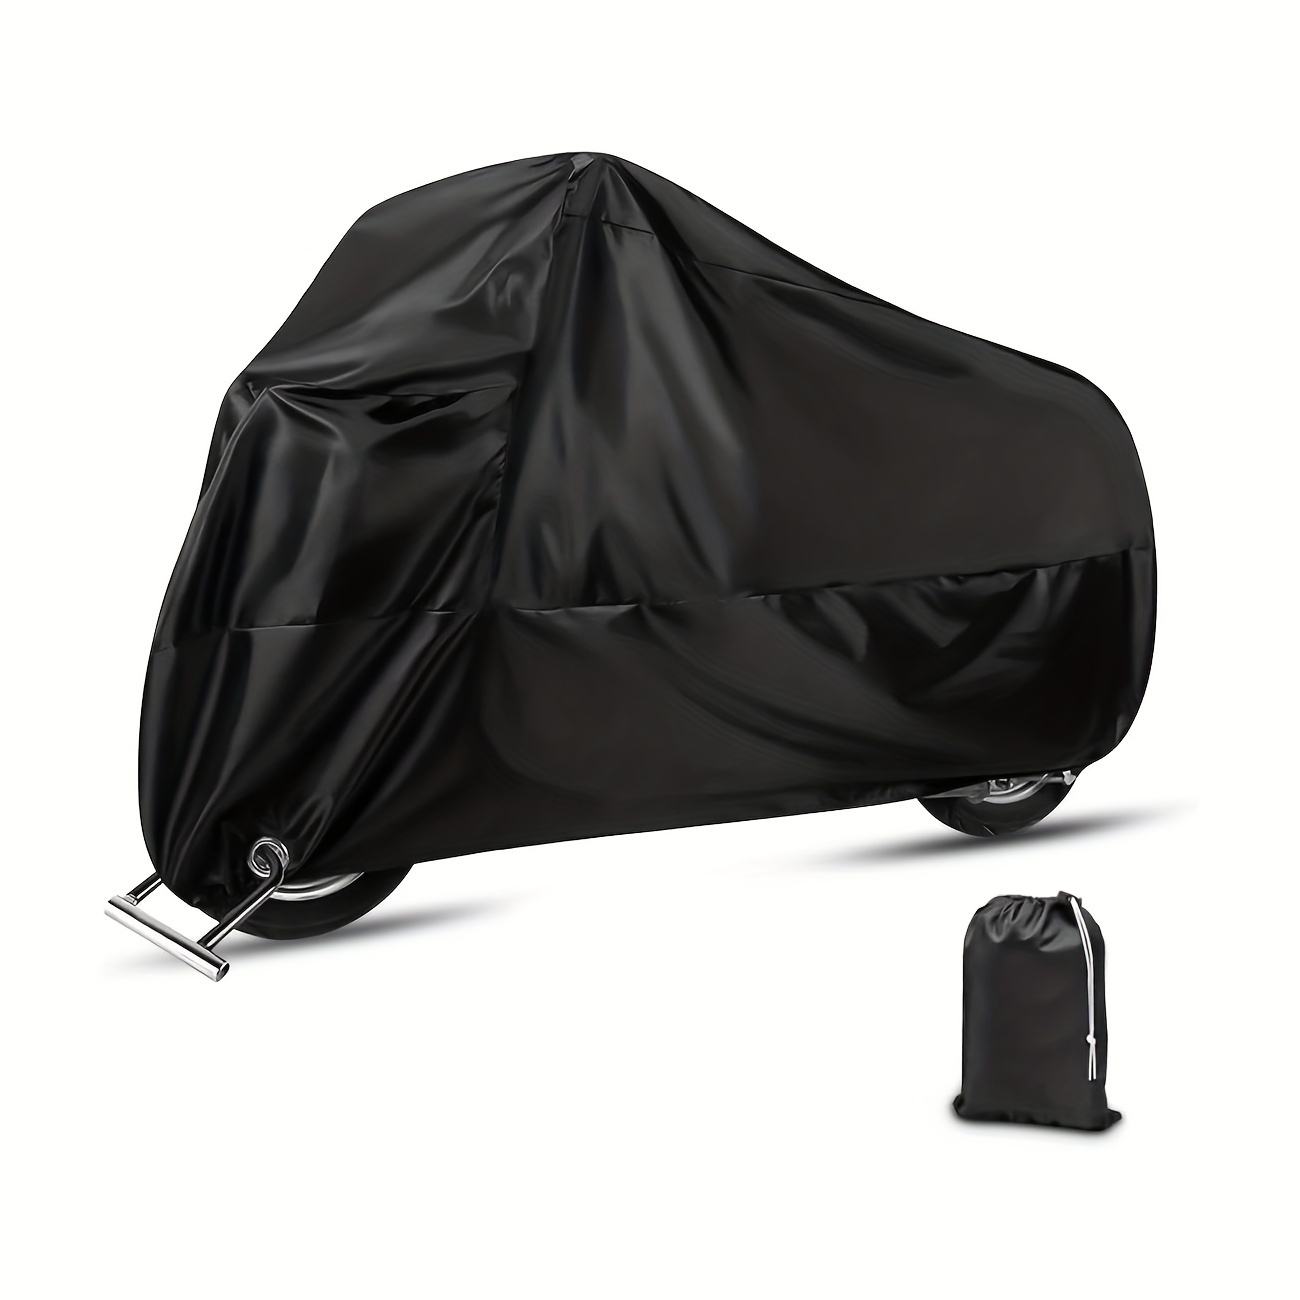 

Waterproof Motorcycle Cover With Lock Hole & Storage Bag - Dustproof Outdoor Protection, All-black, Multiple Sizes Available